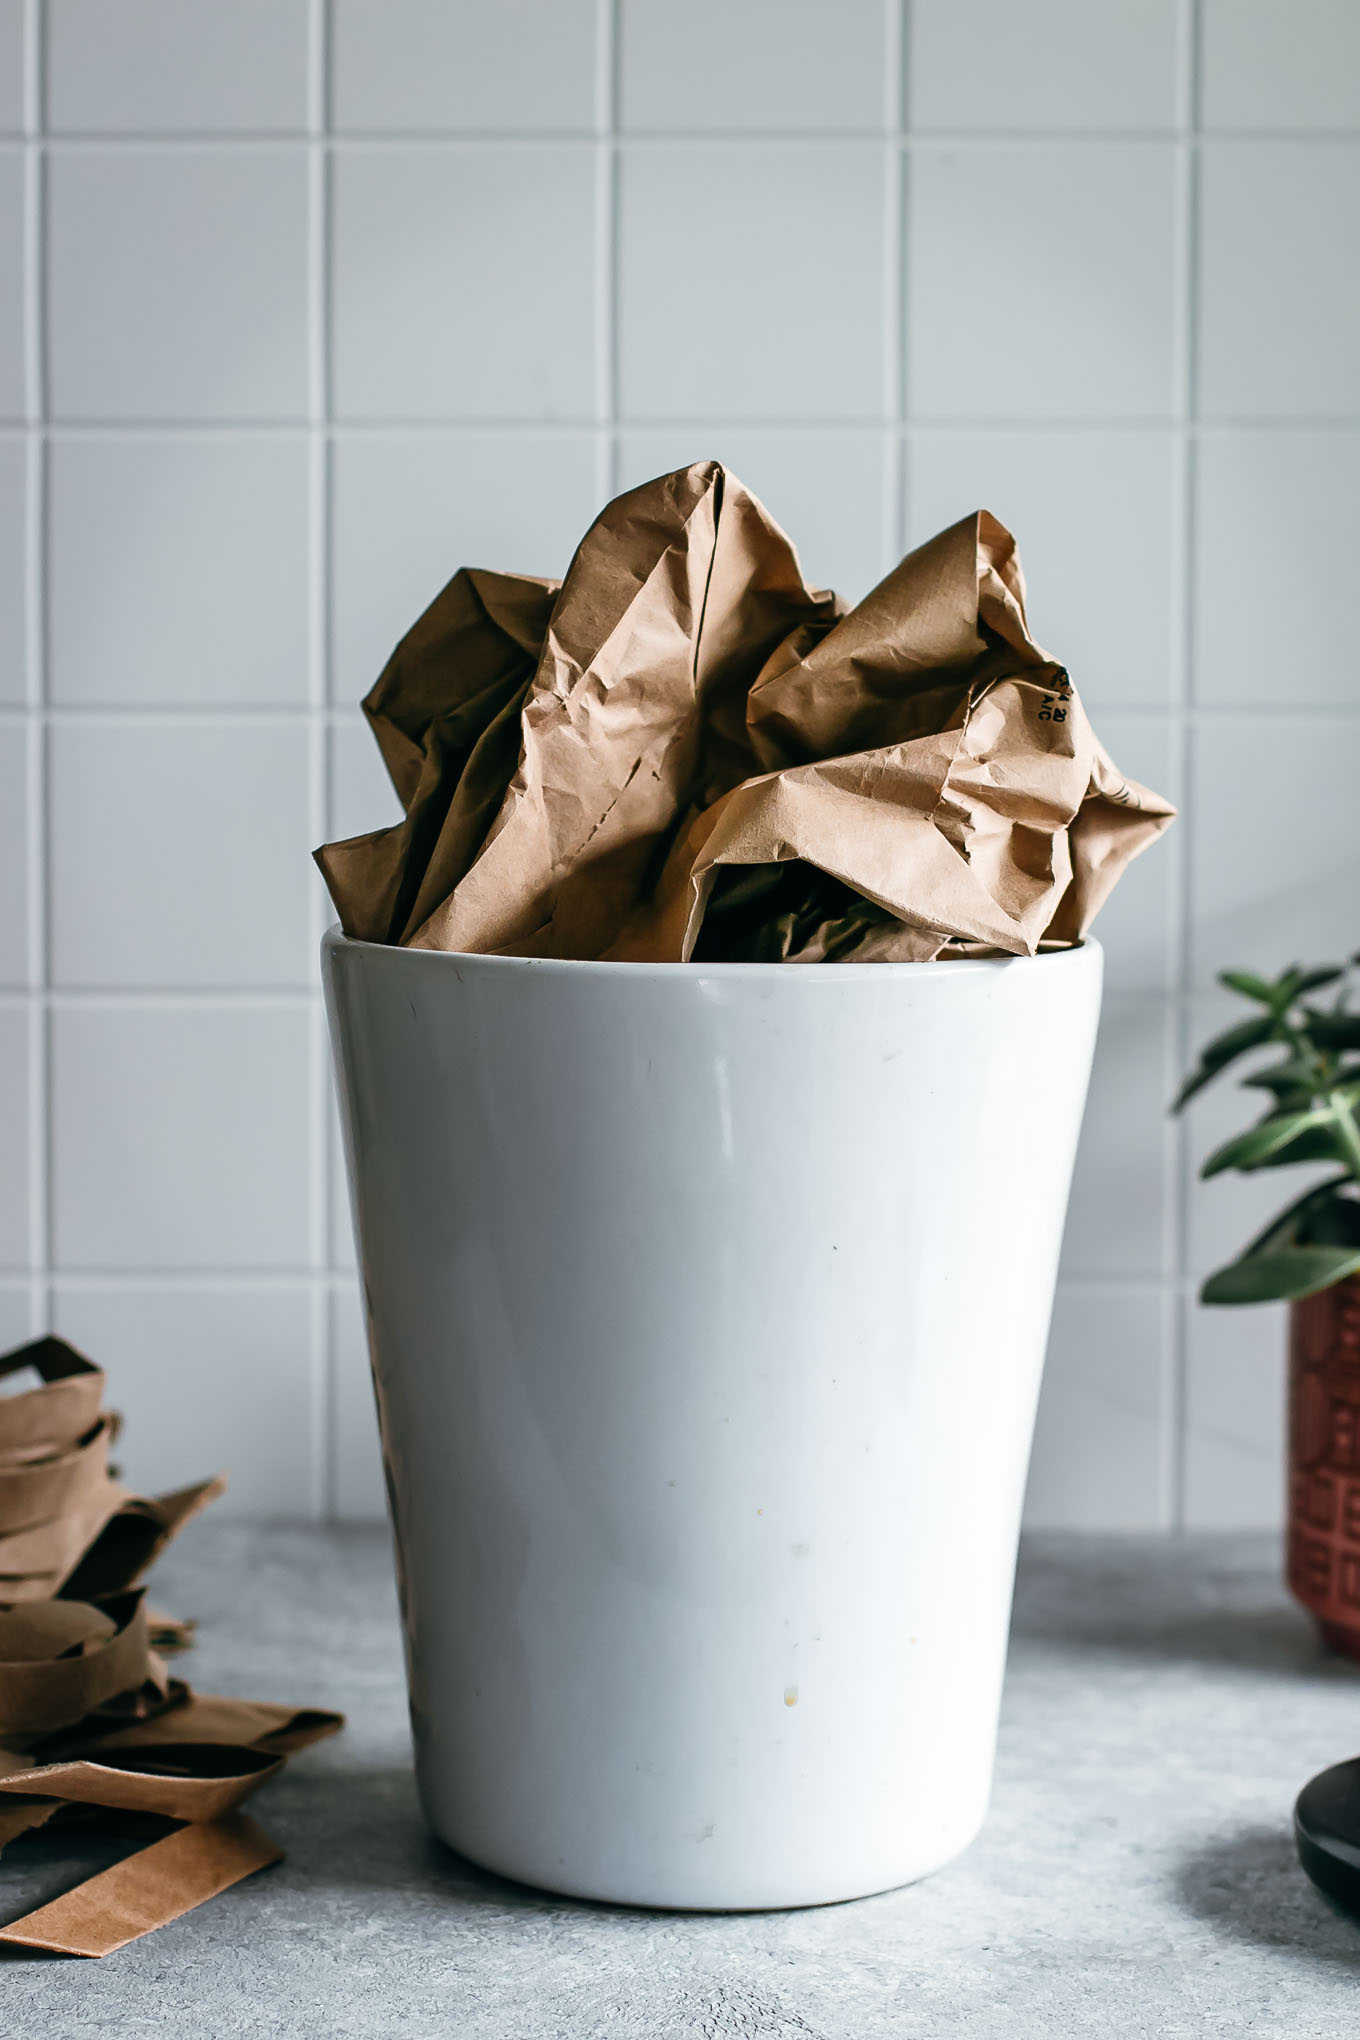 https://www.forkintheroad.co/wp-content/uploads/2021/07/compost-paper-bags-001.jpg